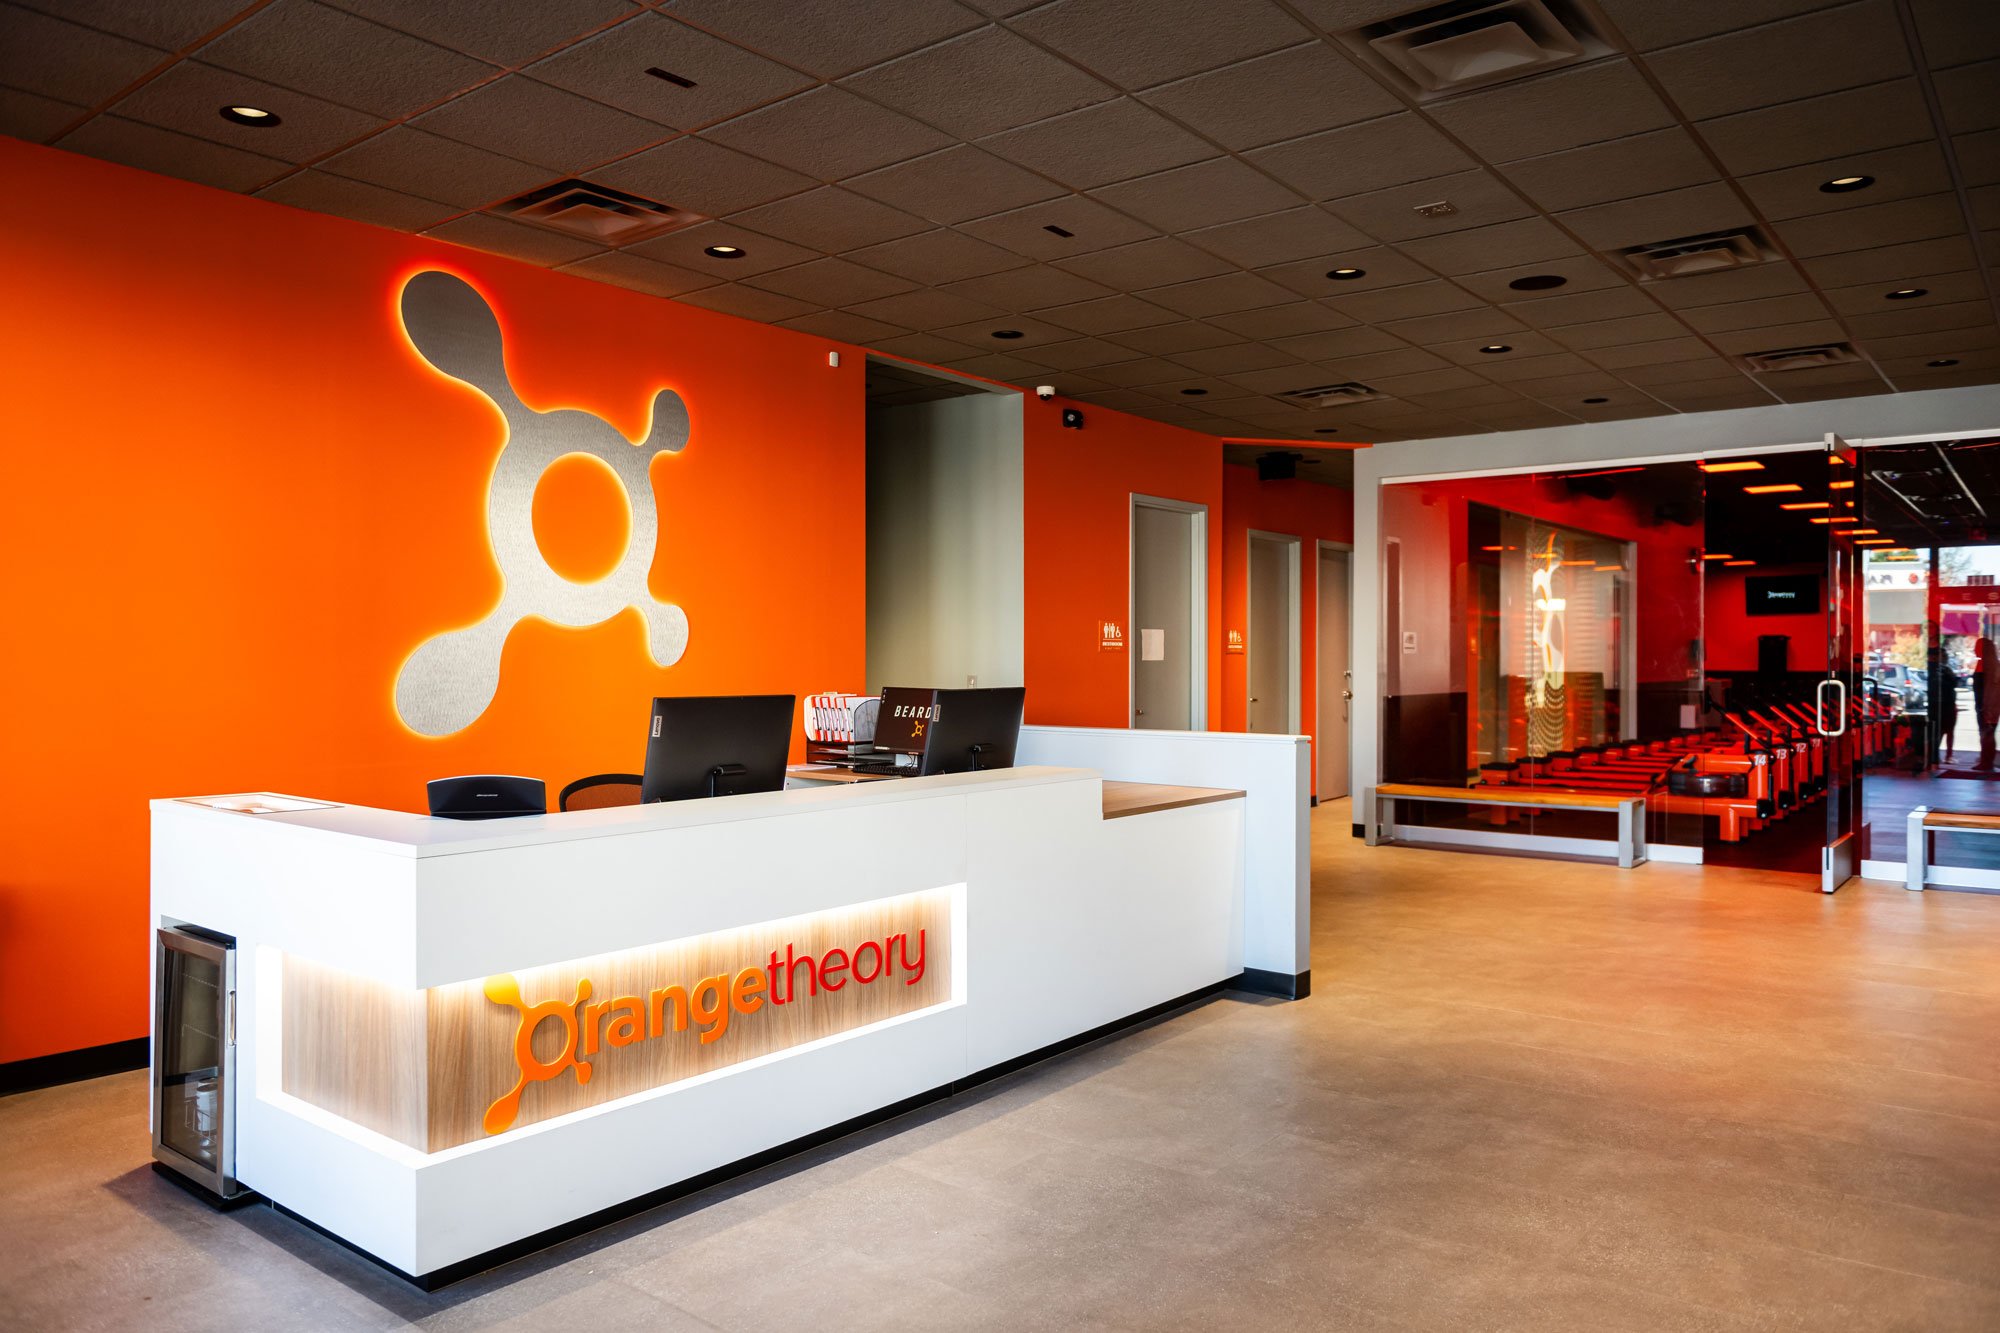 RCC-orange-theory-fitness-knoxville-tennessee-entrance.jpg